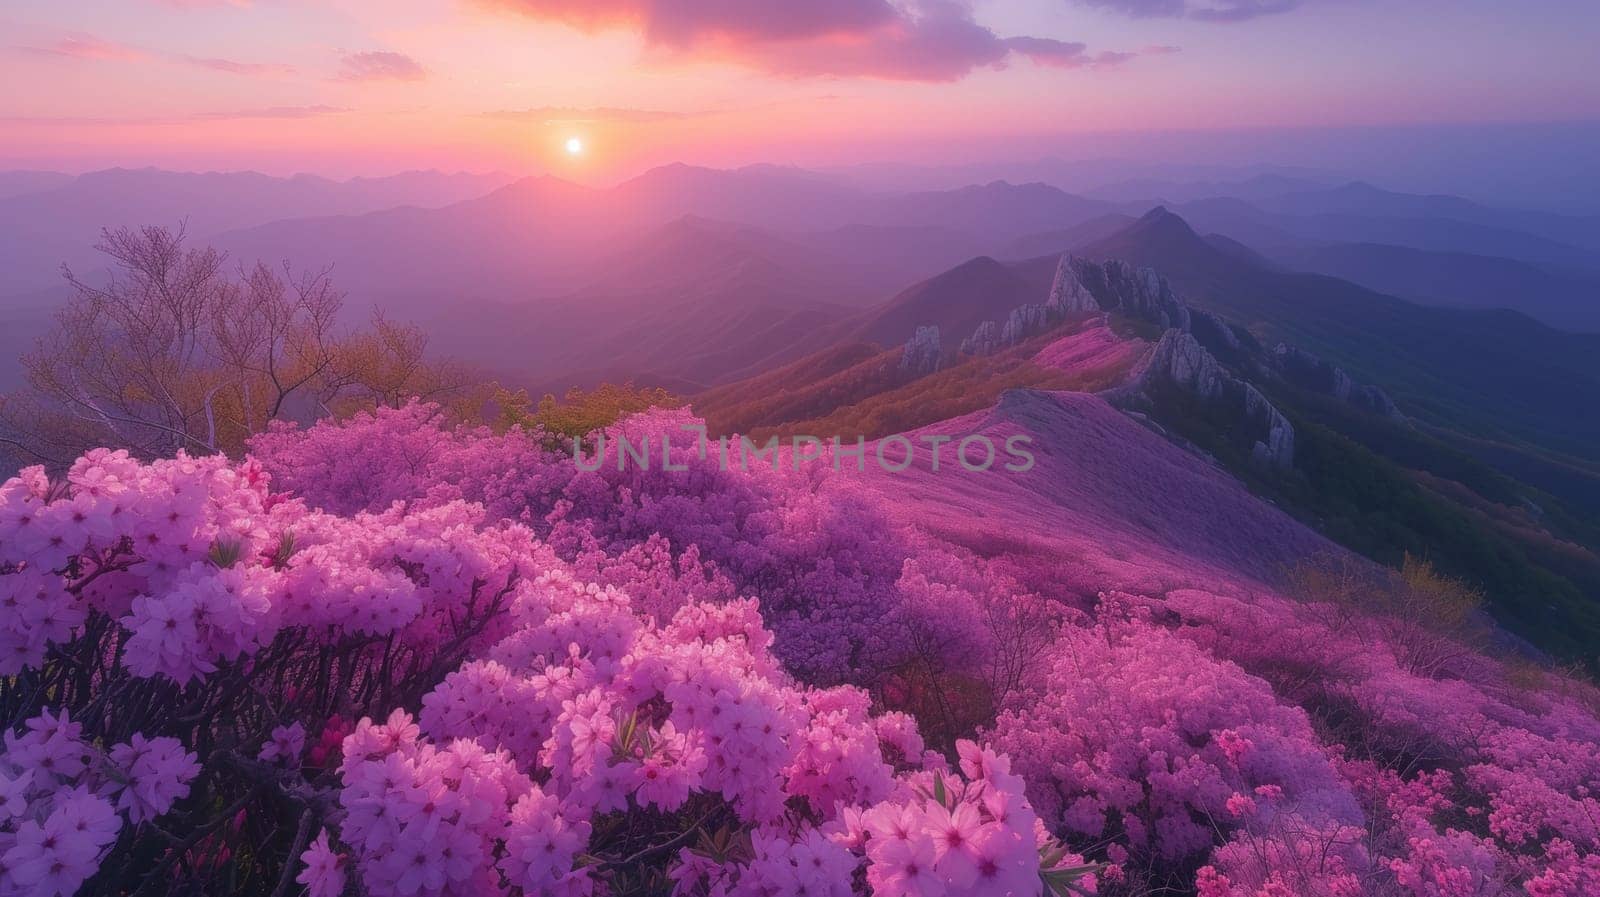 A mountain range with pink flowers in the foreground